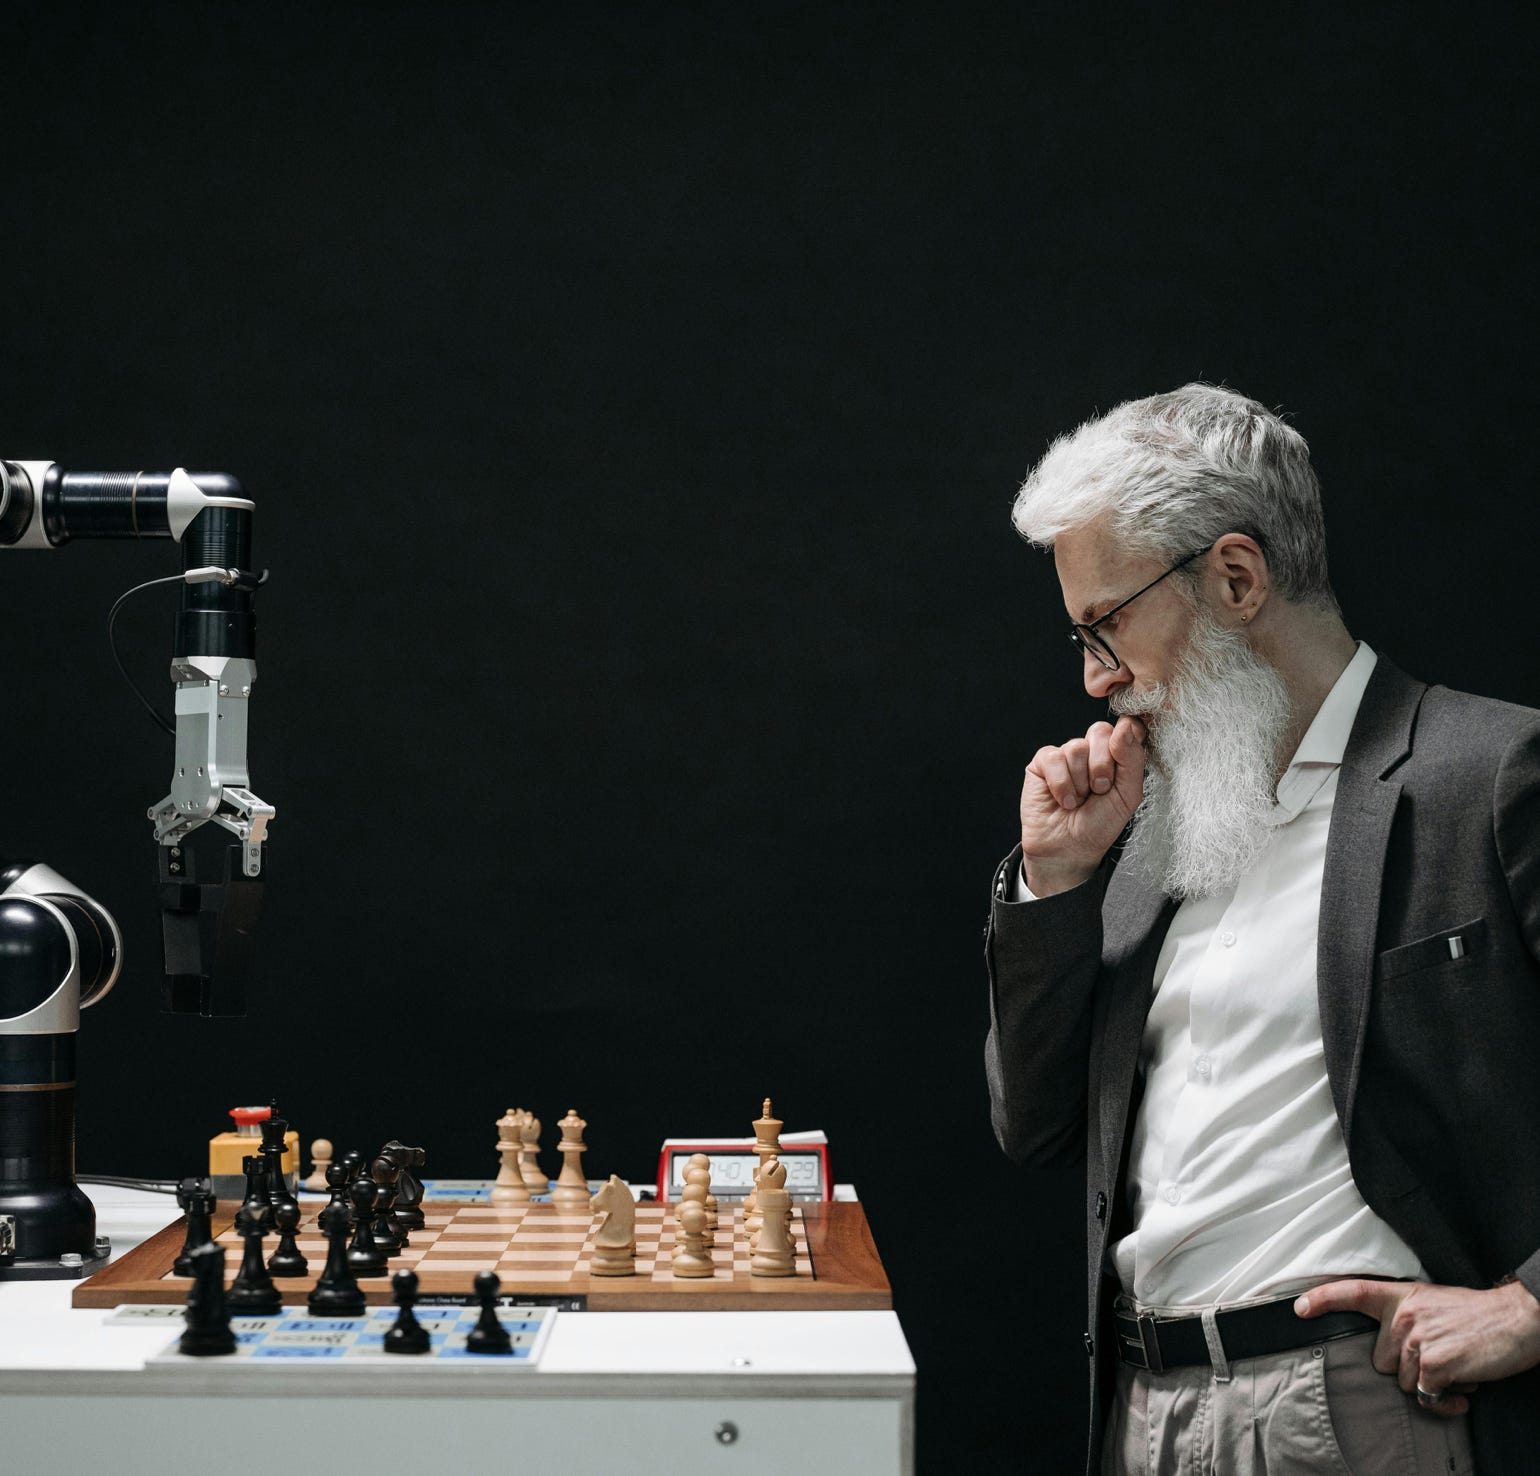 Elderly Man Thinking while Looking at a Chessboard